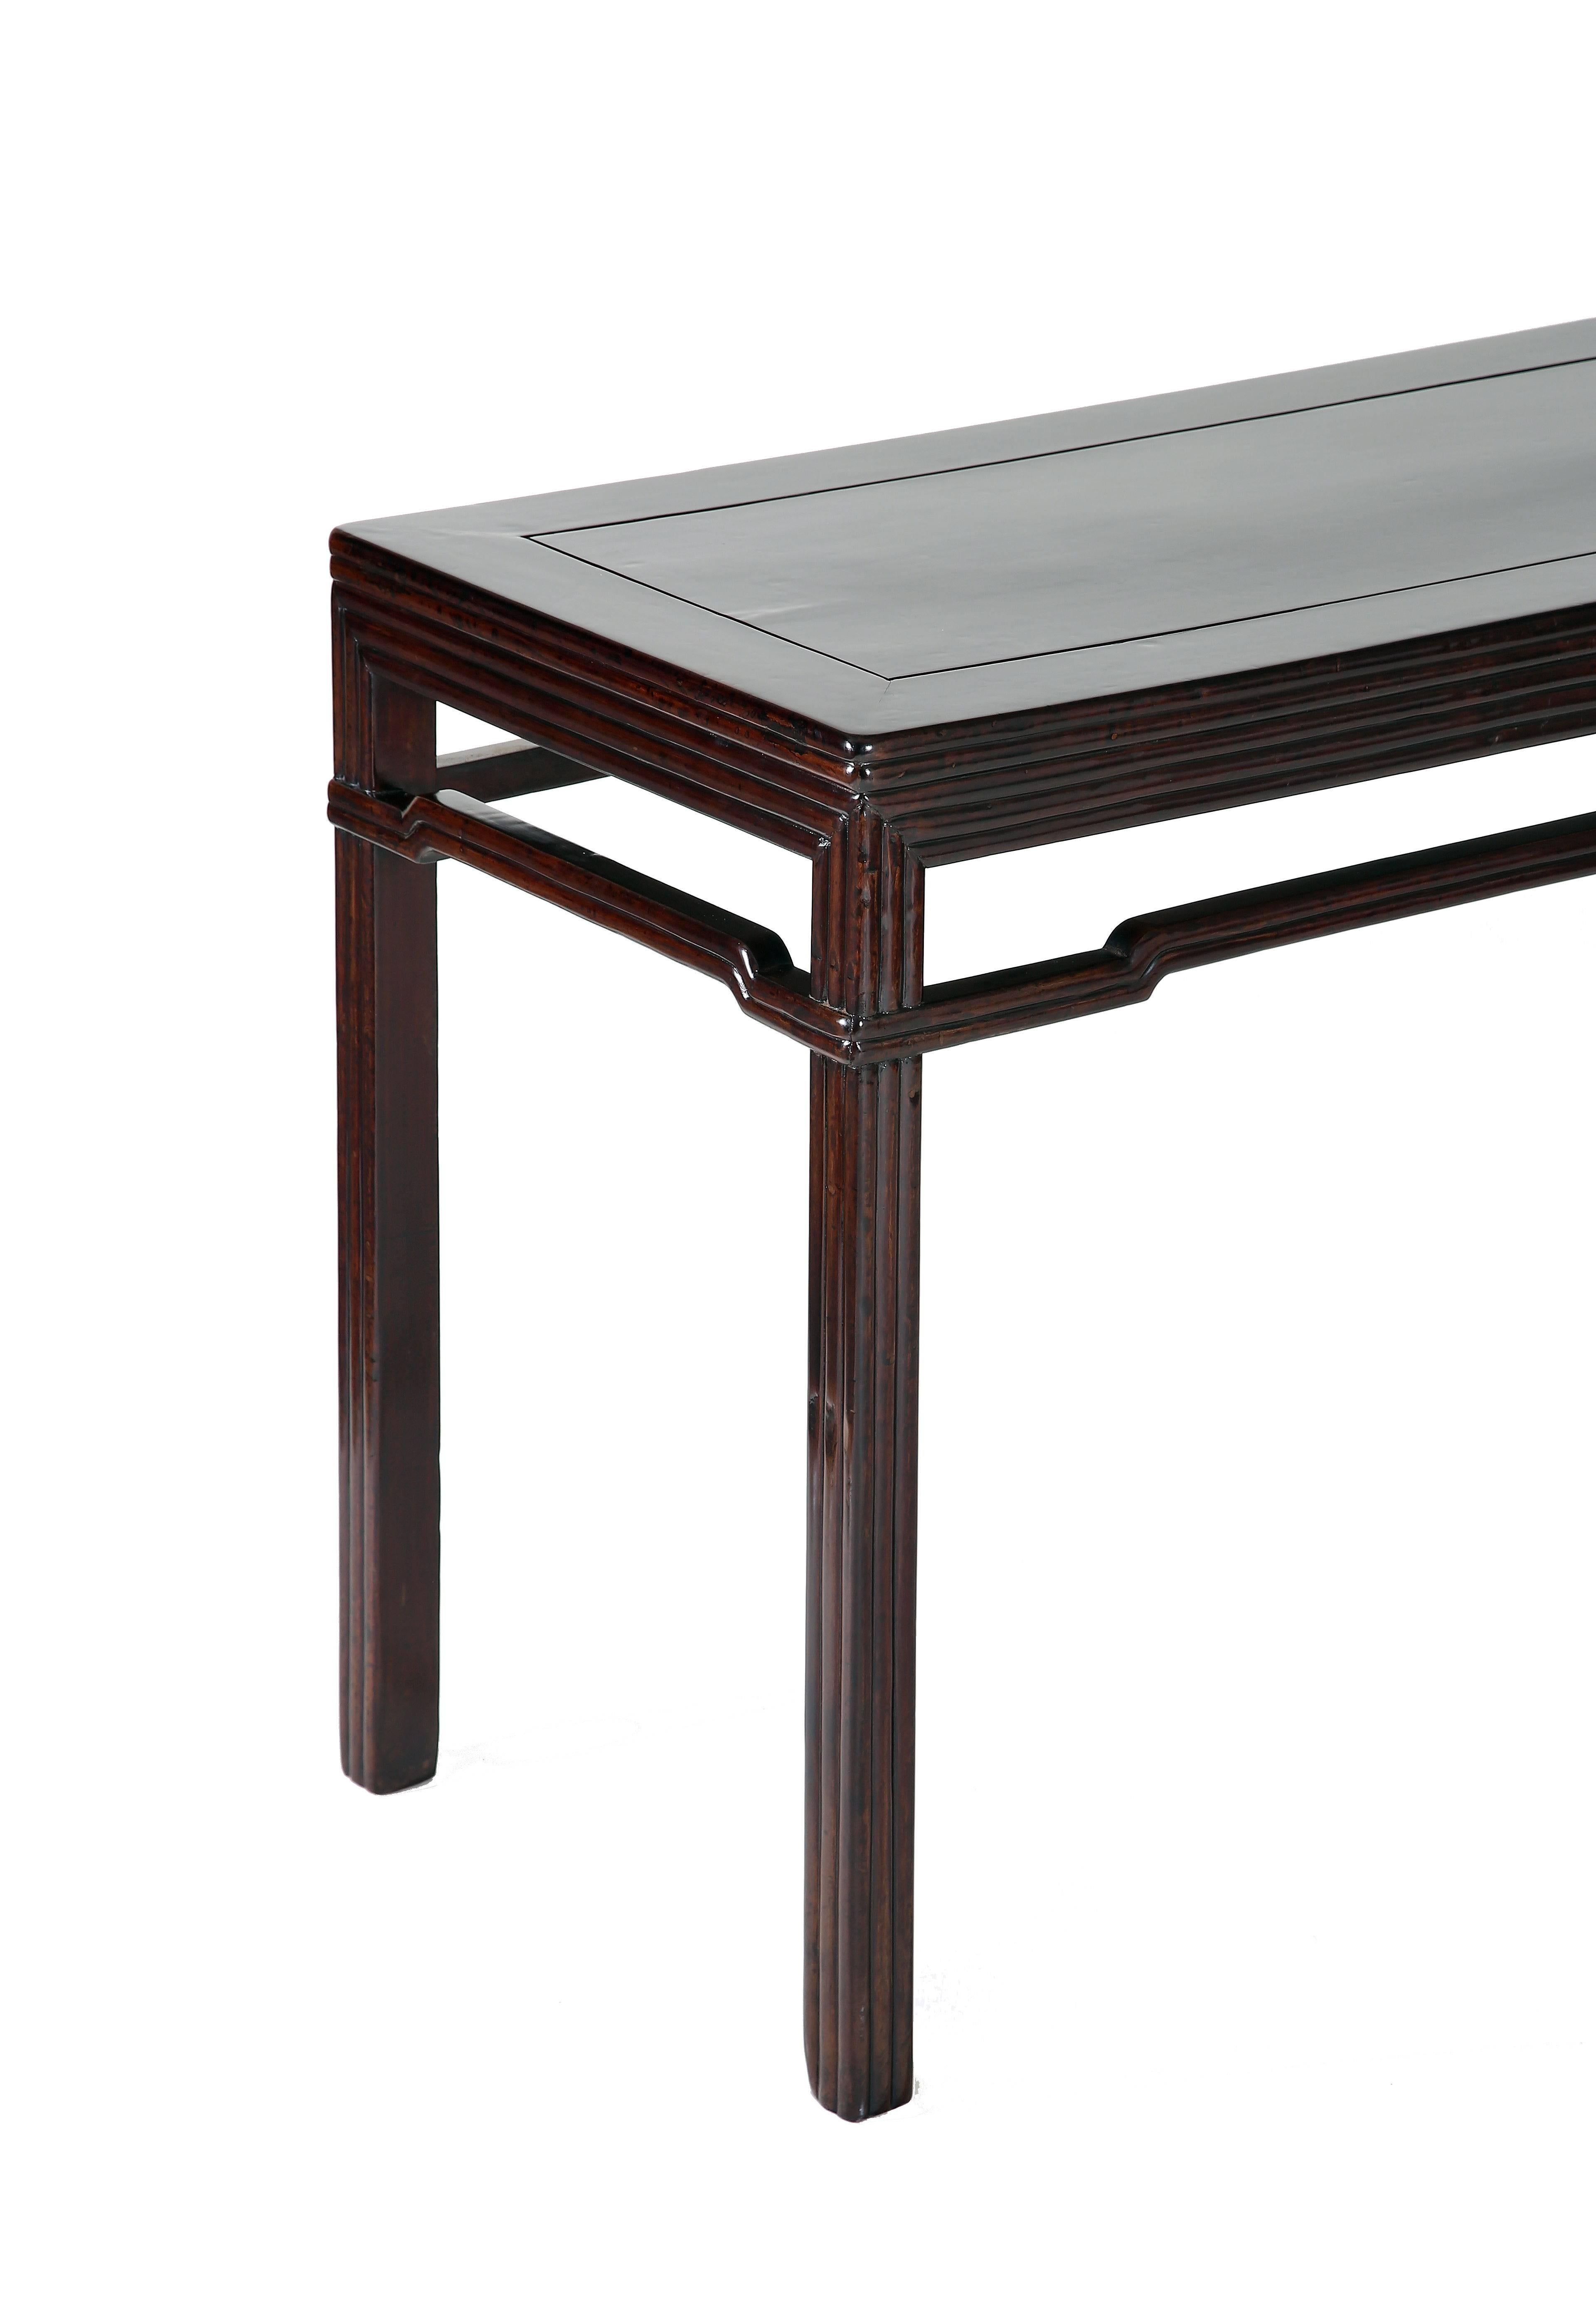 Hand-Crafted Antique Long Chinese Ming Table, Carved Lipped, Simulating Bamboo, Chinoiserie